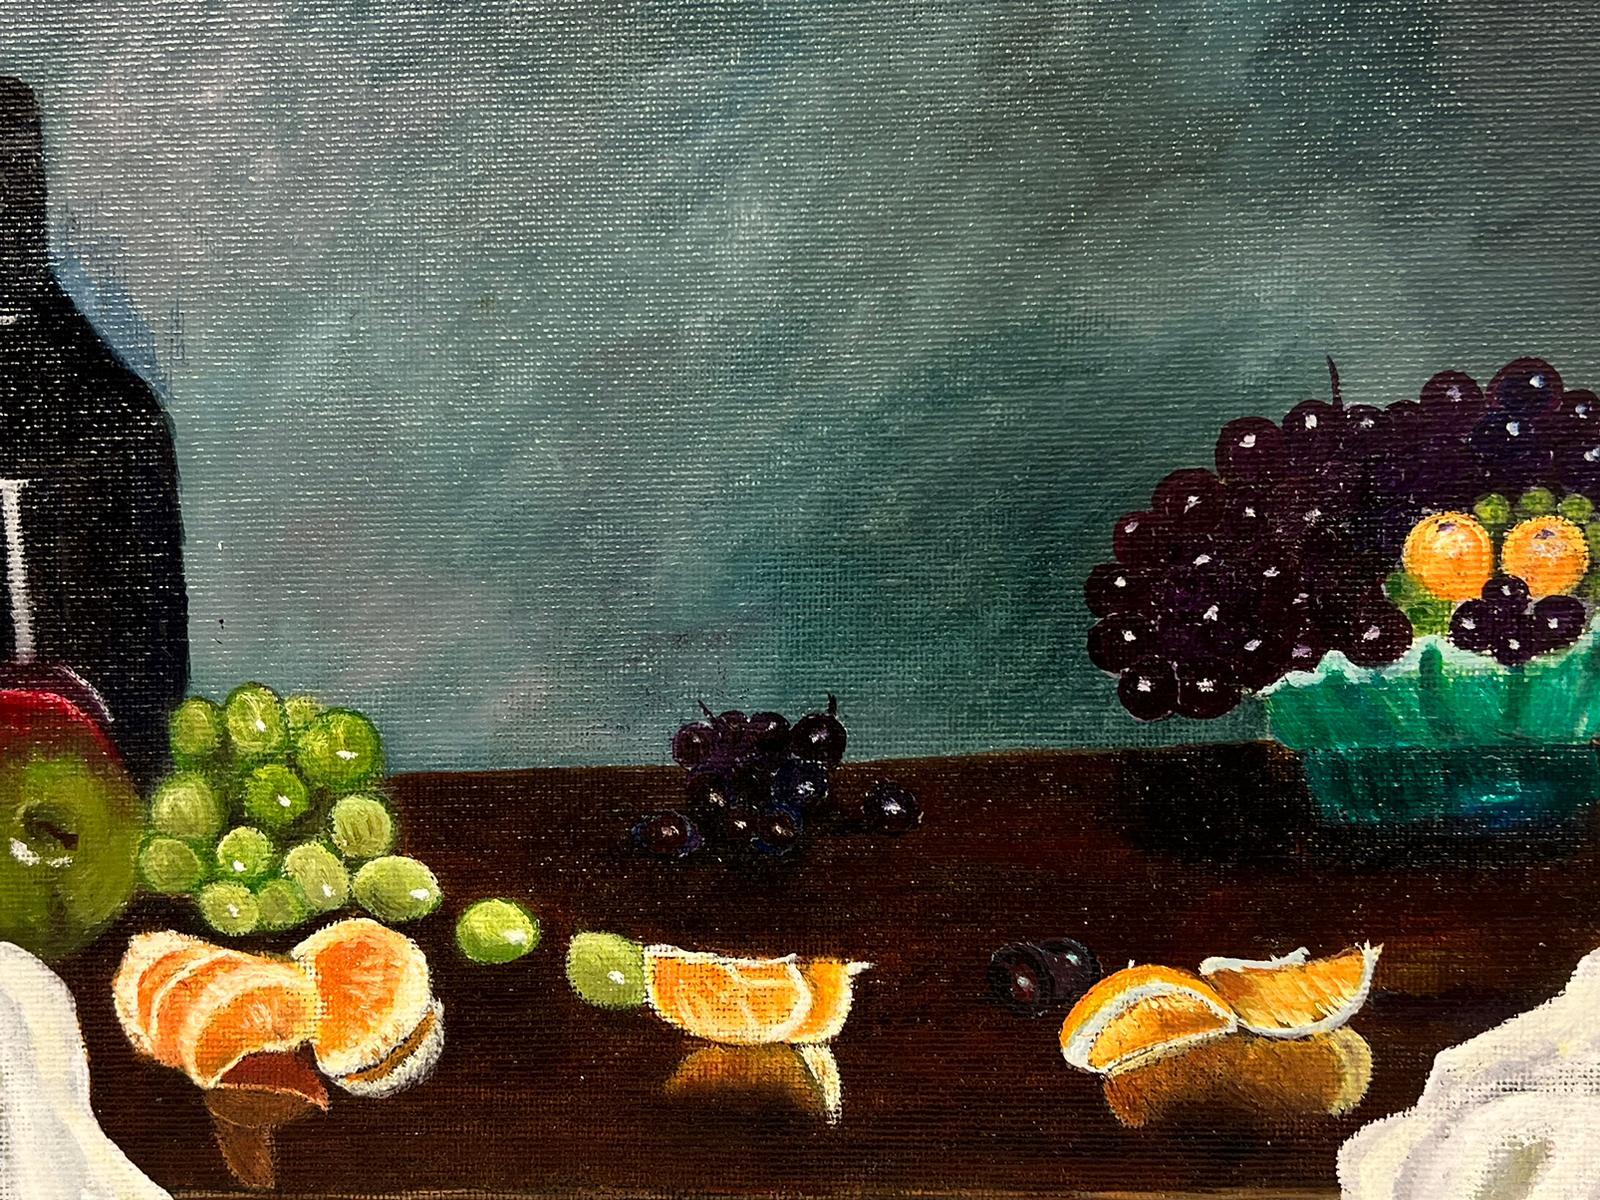 painting grapes with acrylics